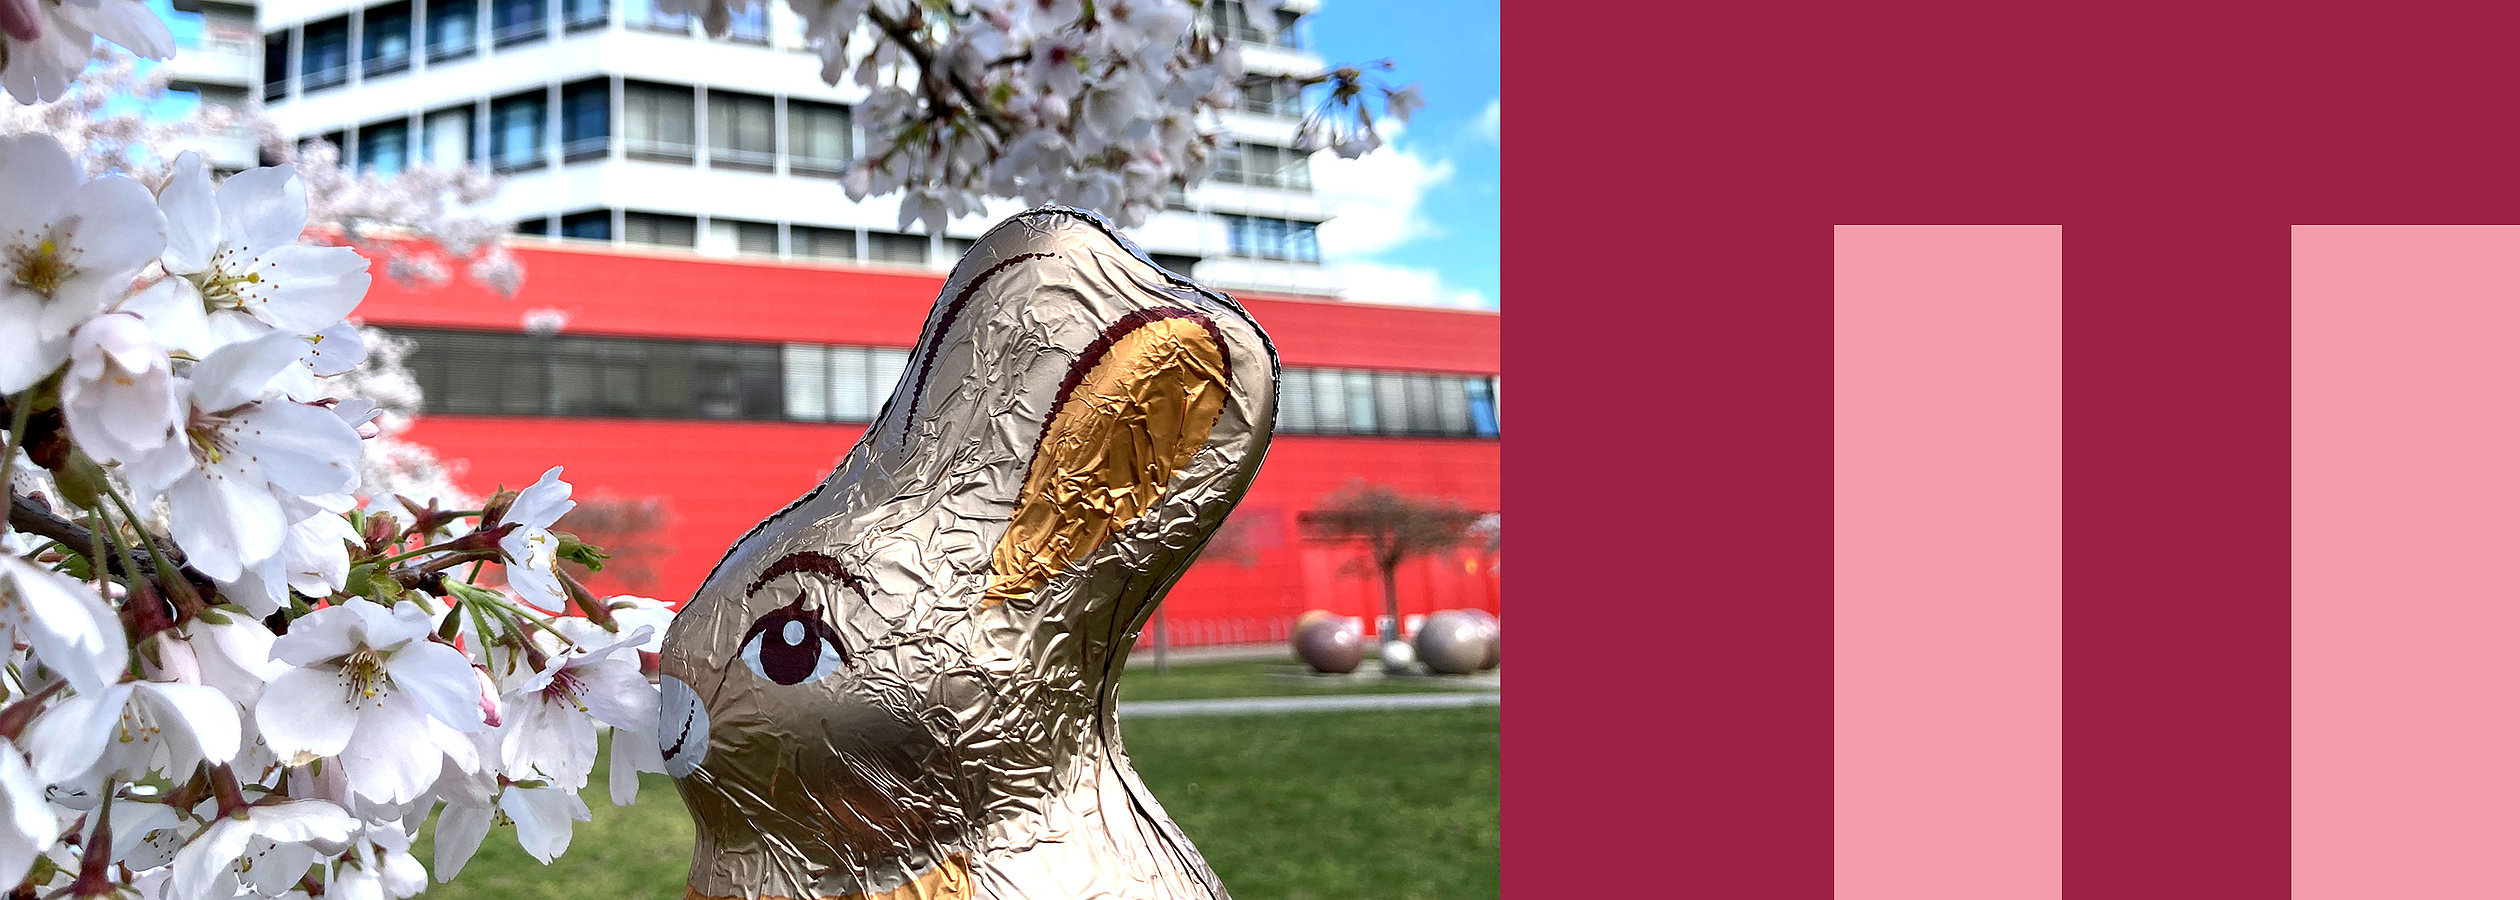 A chocolate bunny wrapped in gold paper sits in the grass on the campus of the University of Bremen.